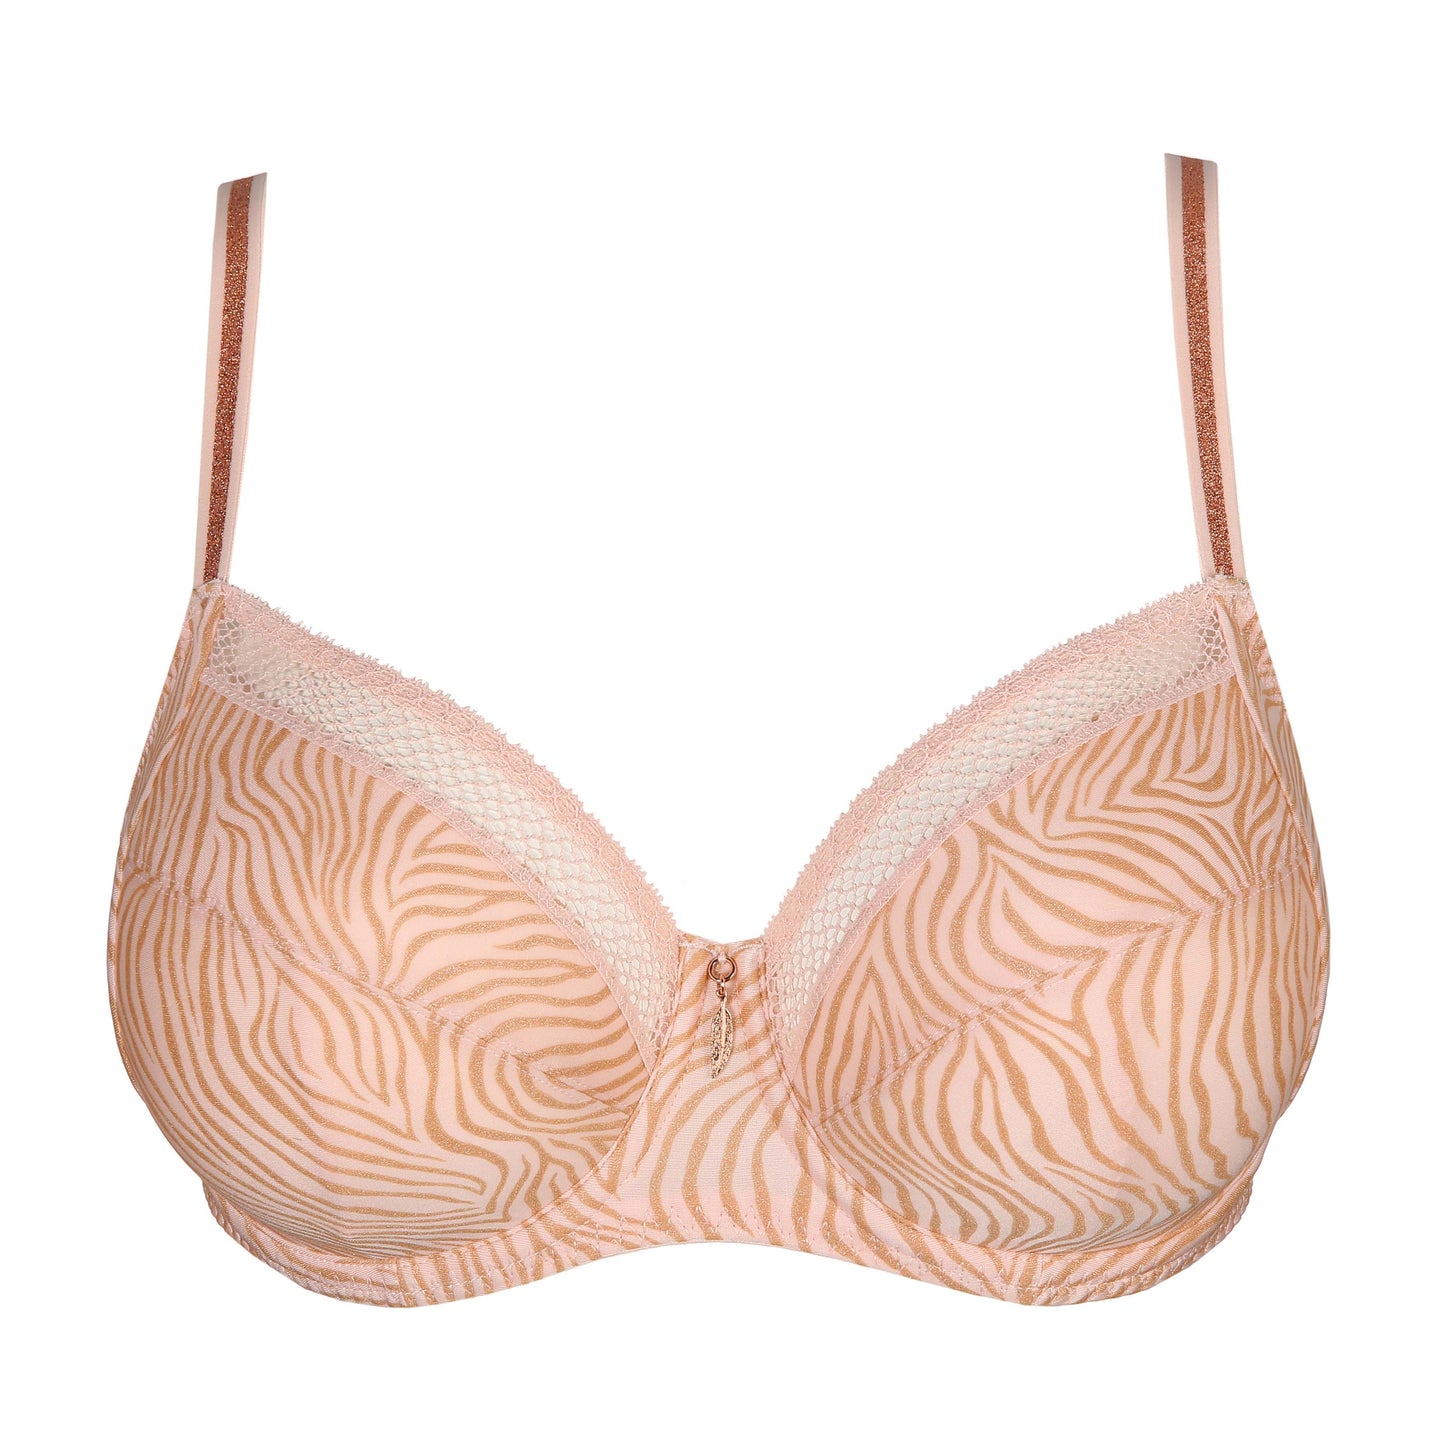 PrimaDonna Twist Avellino volle cup bh pearly pink